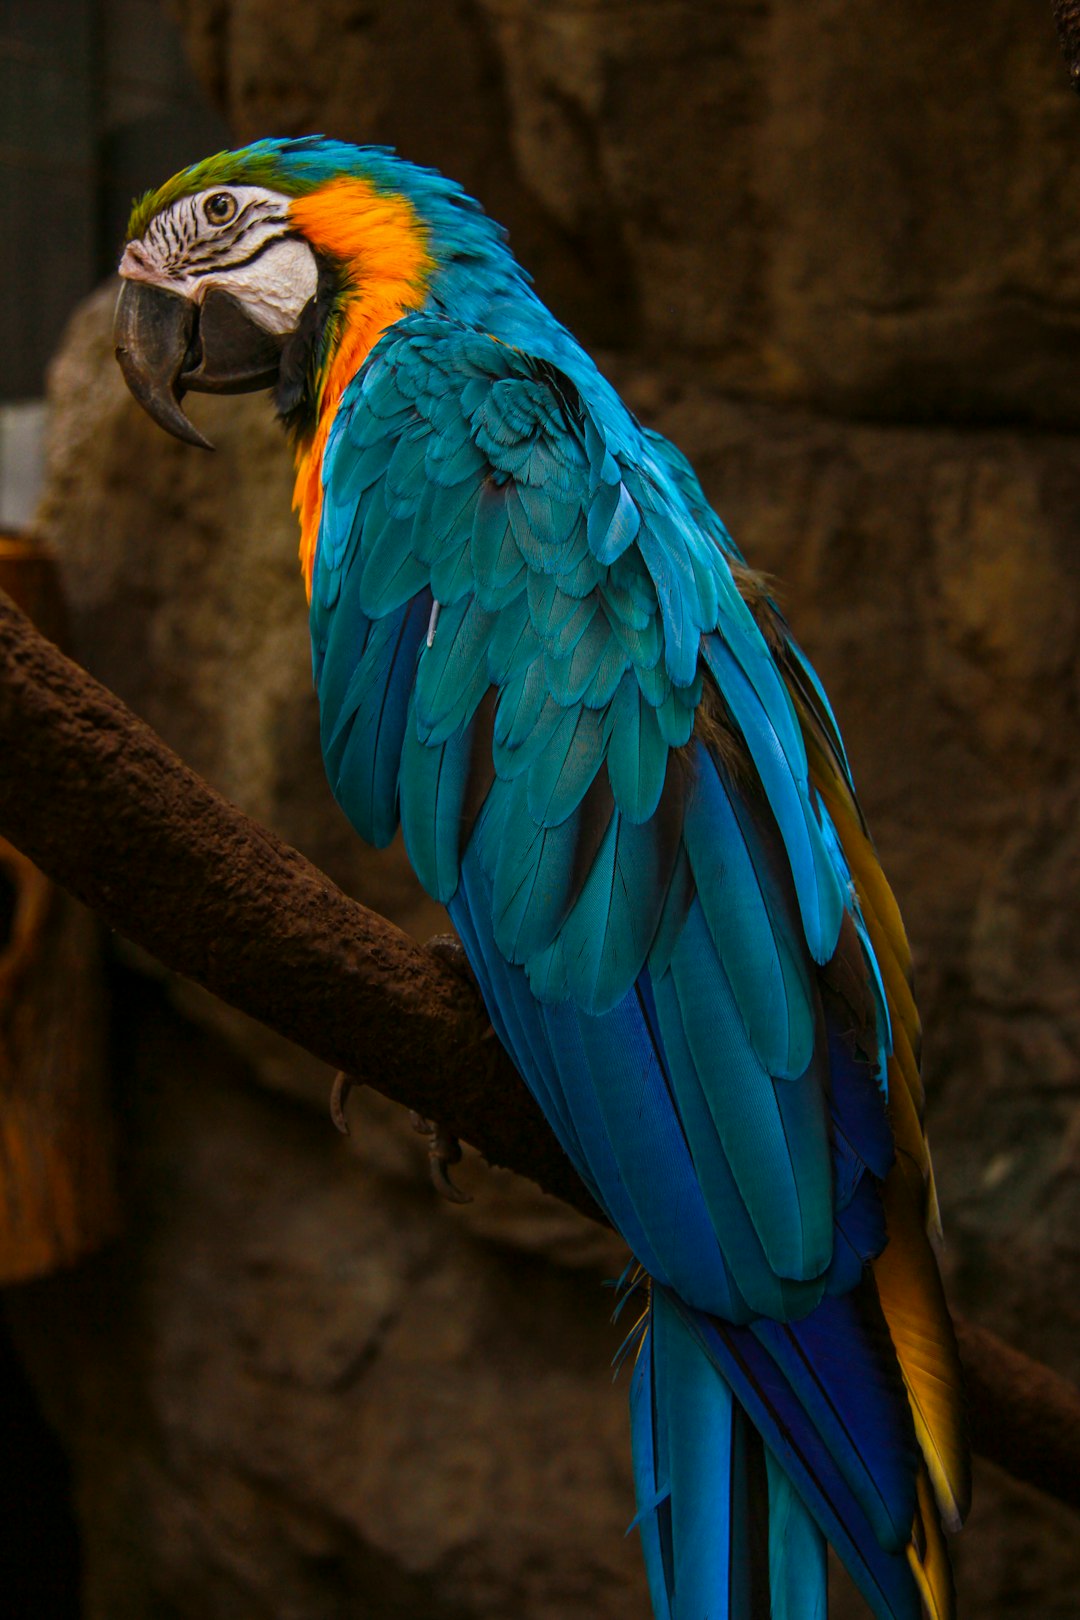  close up photography of multicolored parrot parrot